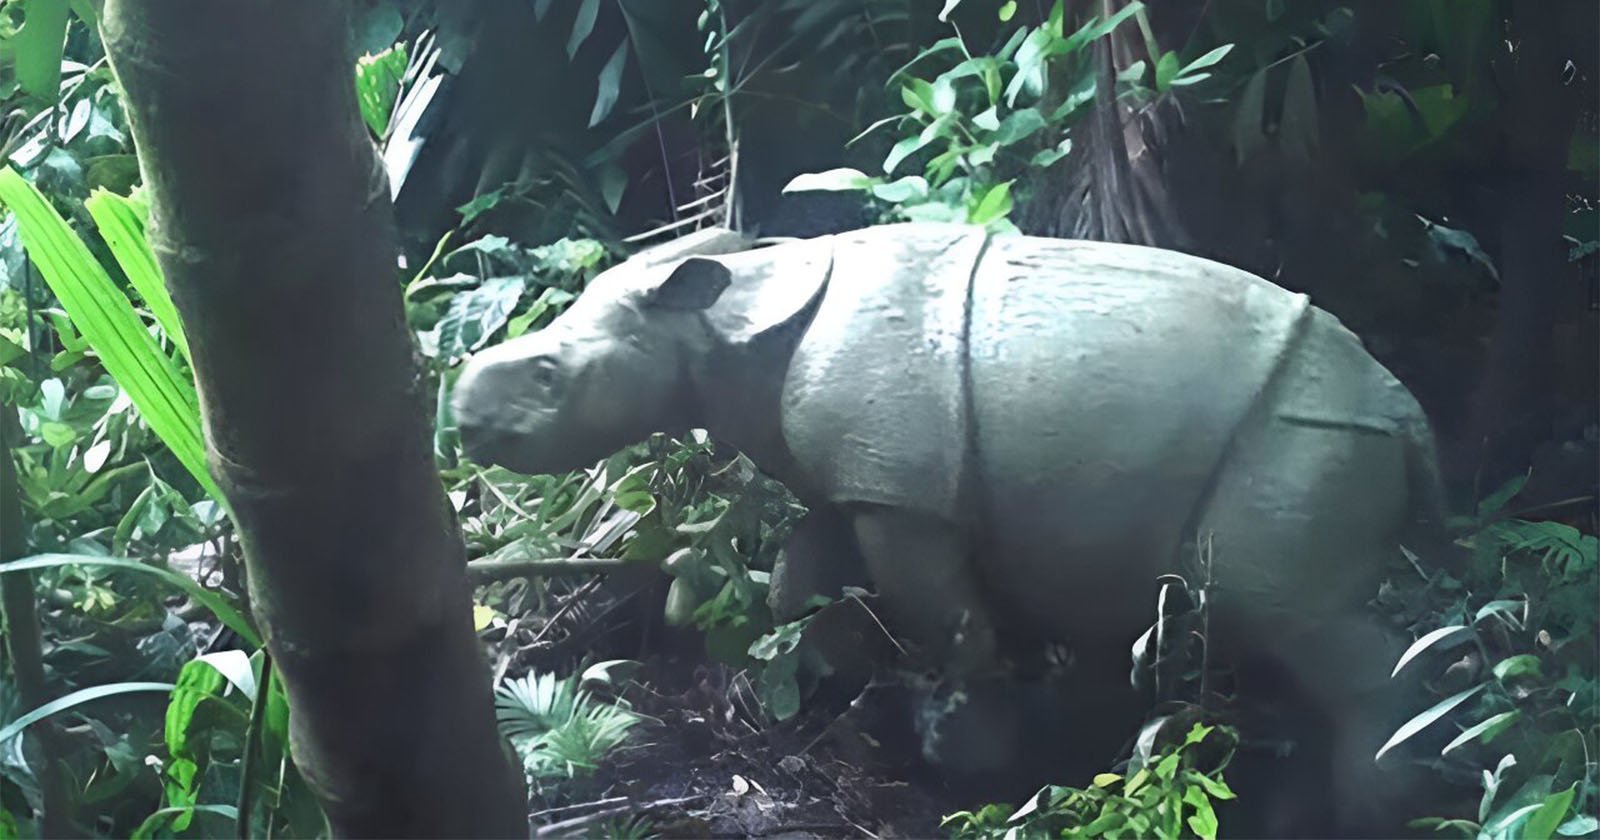 A Javan rhinoceros wanders through a dense tropical forest, partially obscured by thick foliage and a foreground tree trunk, evoking a serene, natural atmosphere.